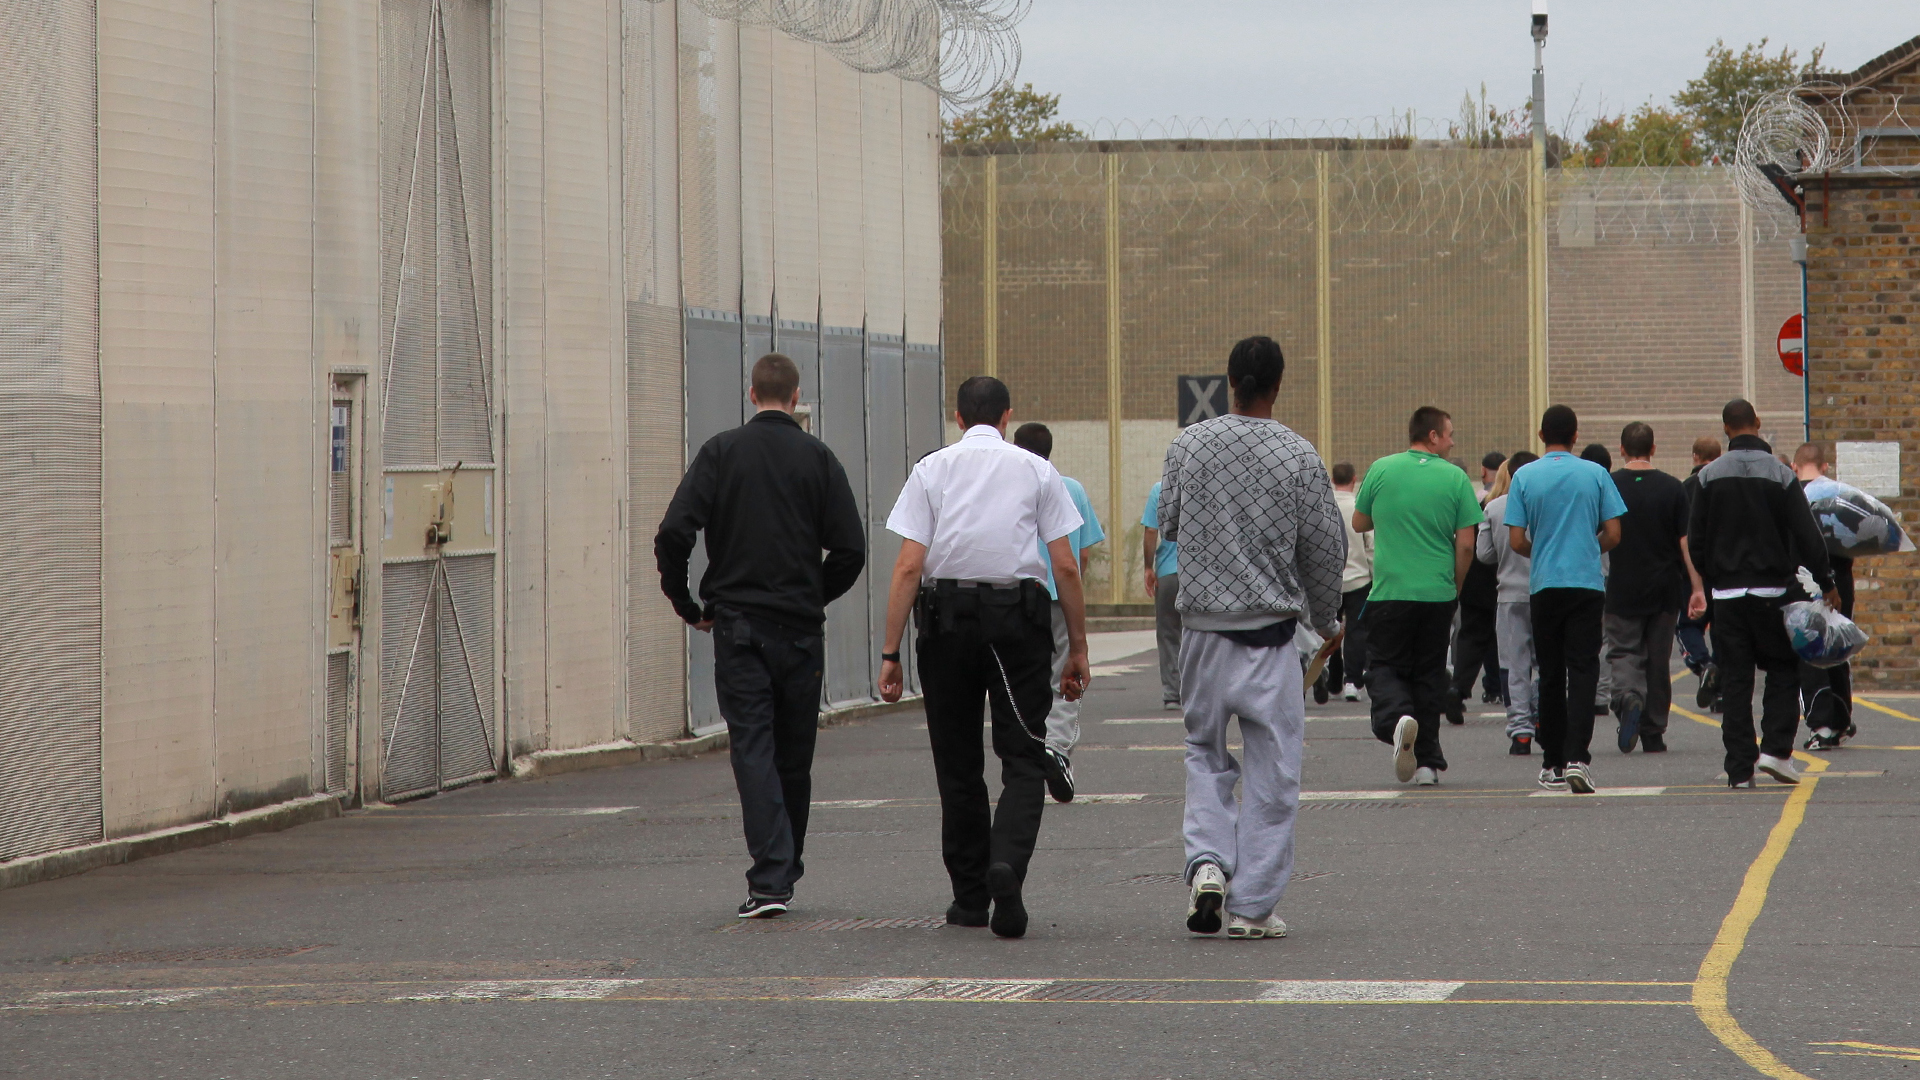 People walking into the prison gates